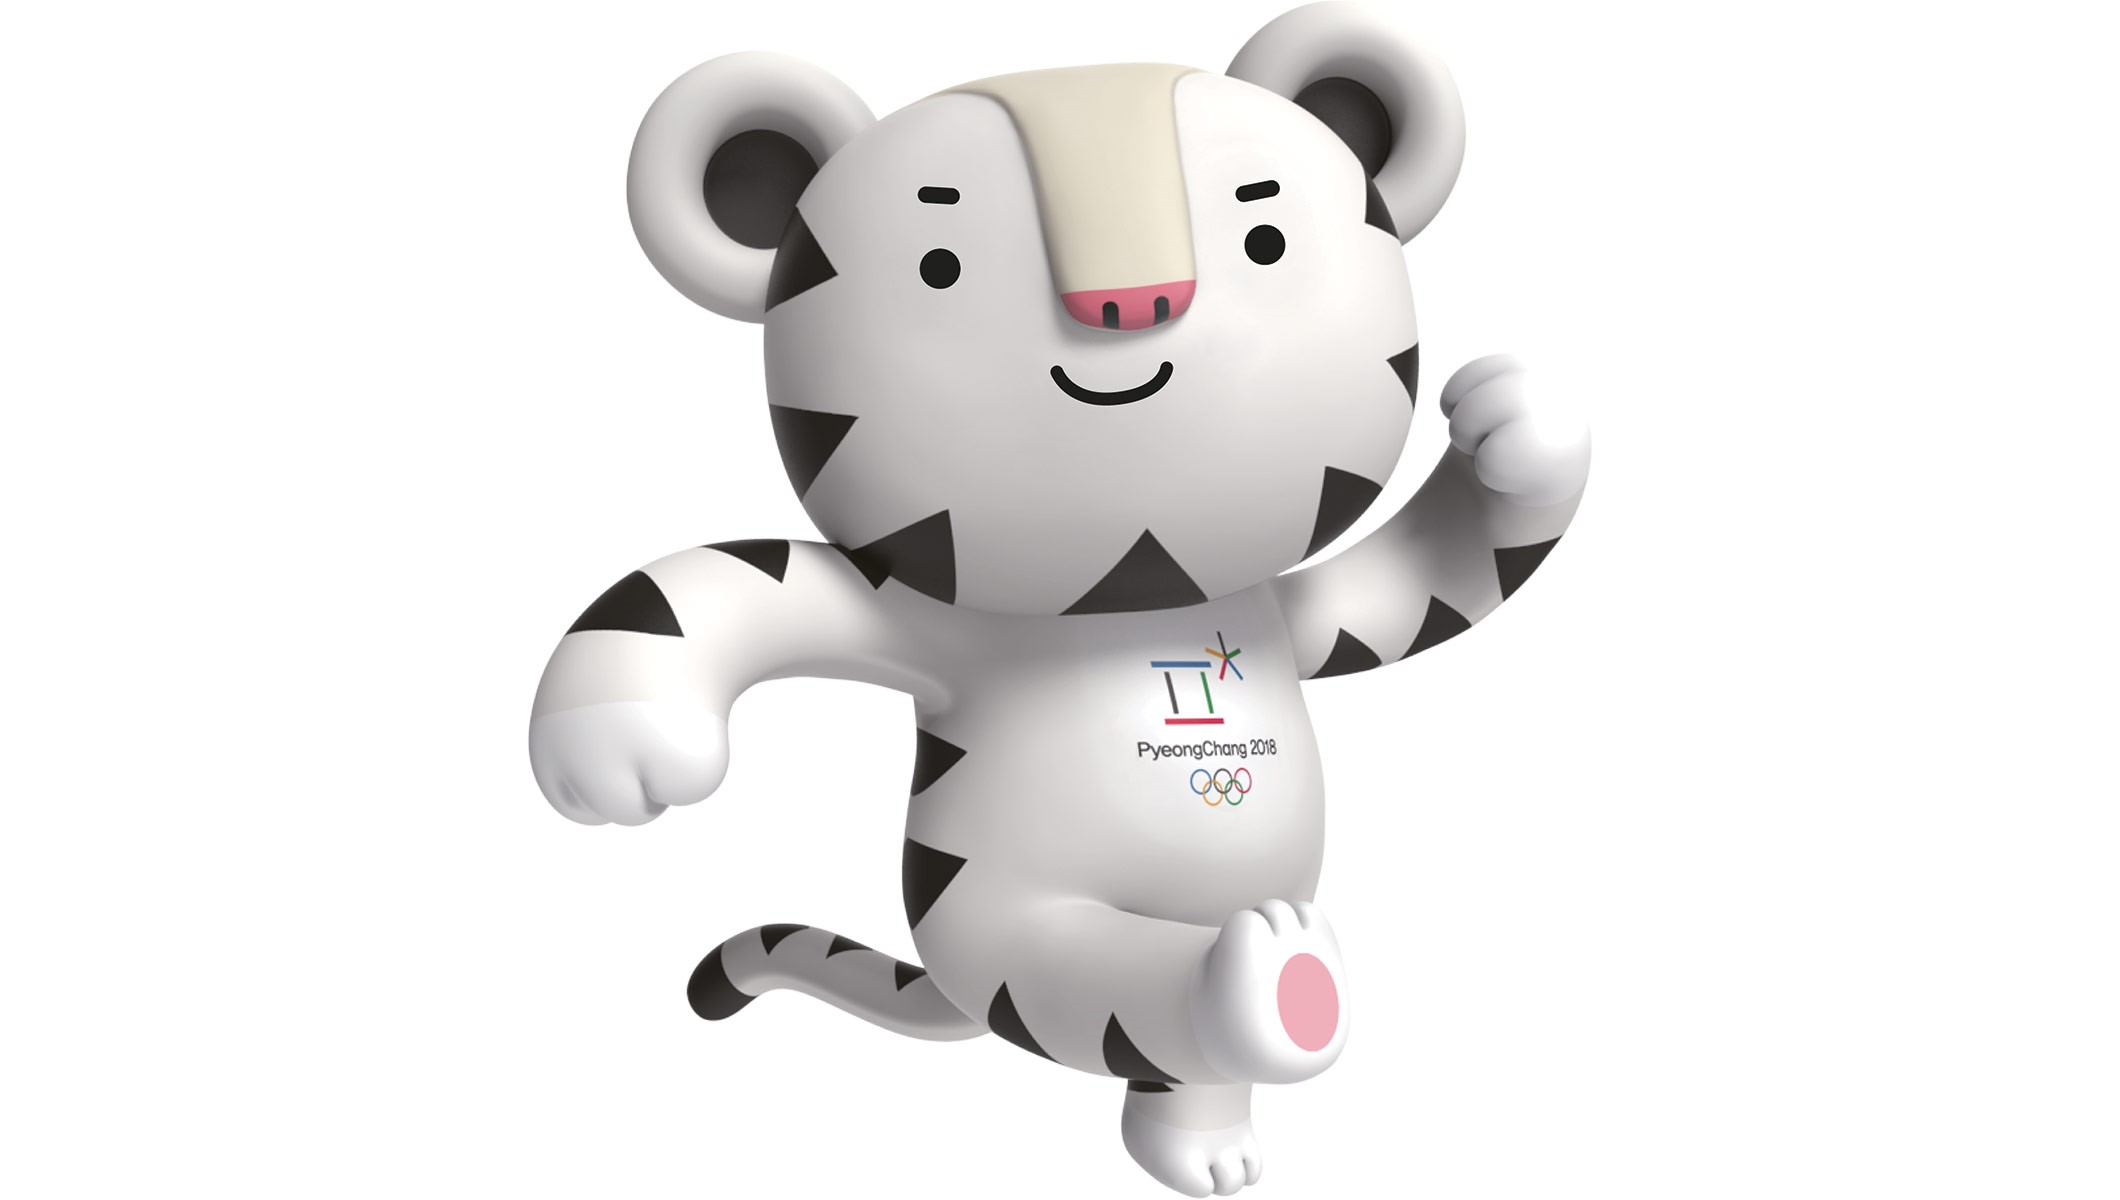 Winter Olympic 2018 official mascot